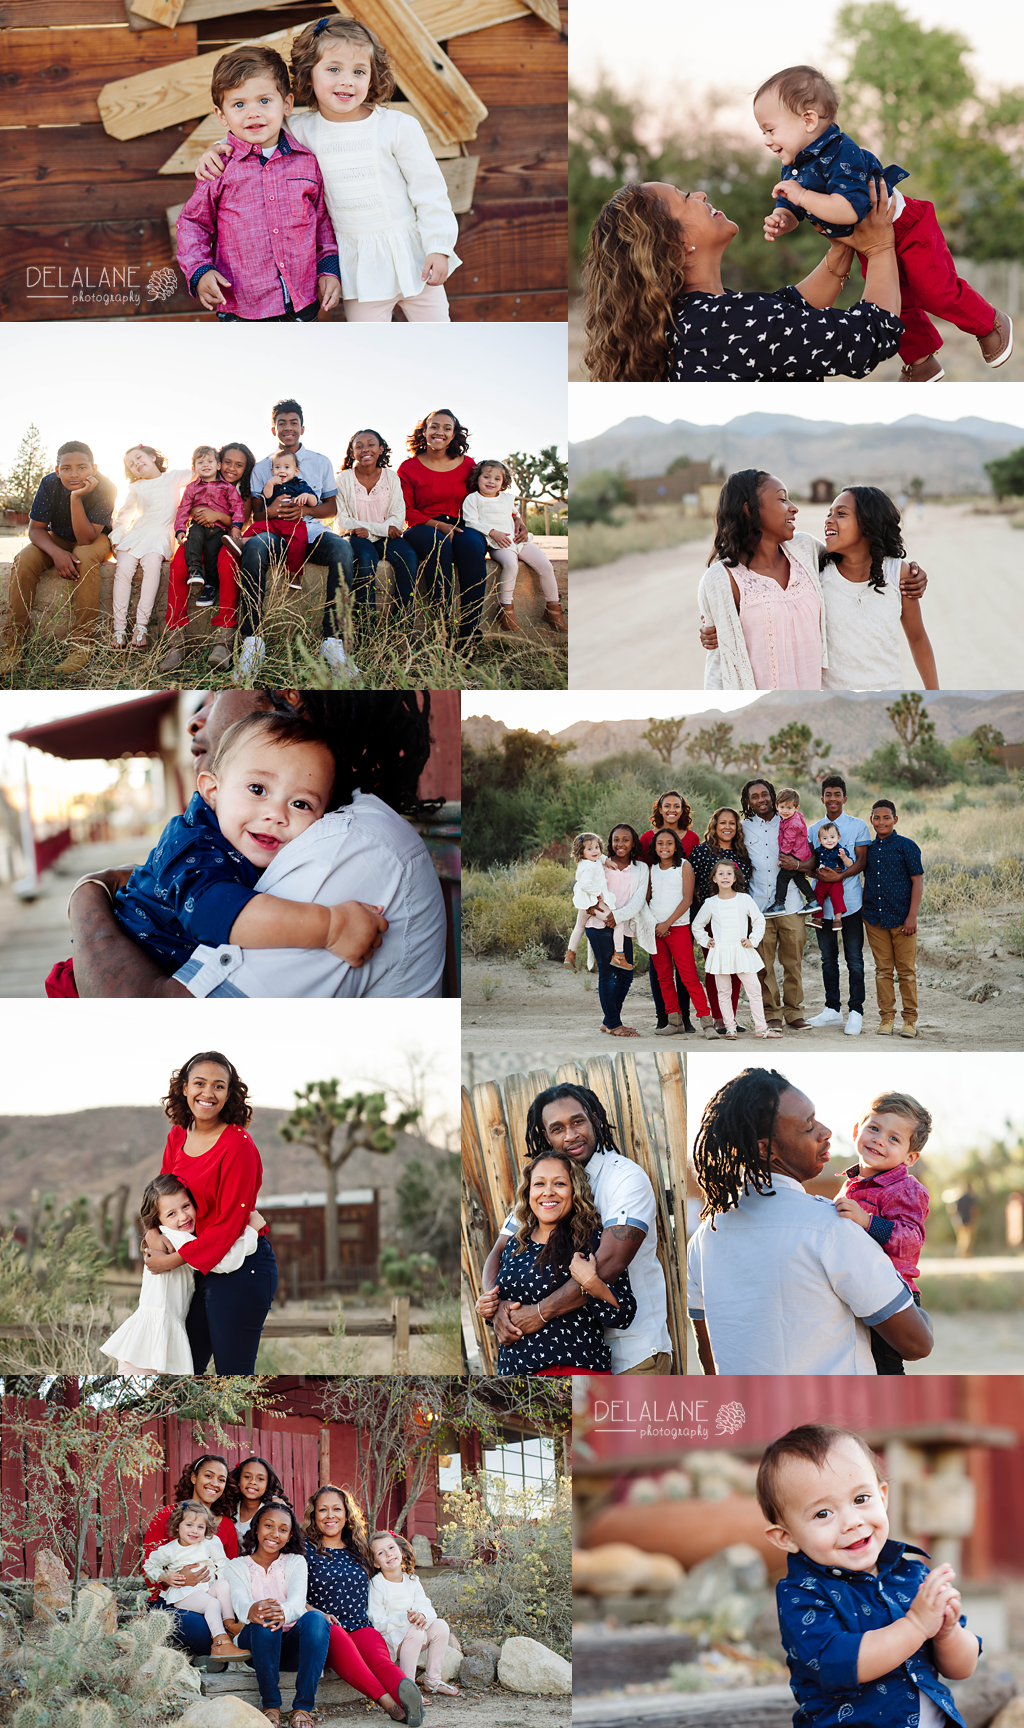 DelaLane Photography - Yucca Valley Photographer - Family Photography